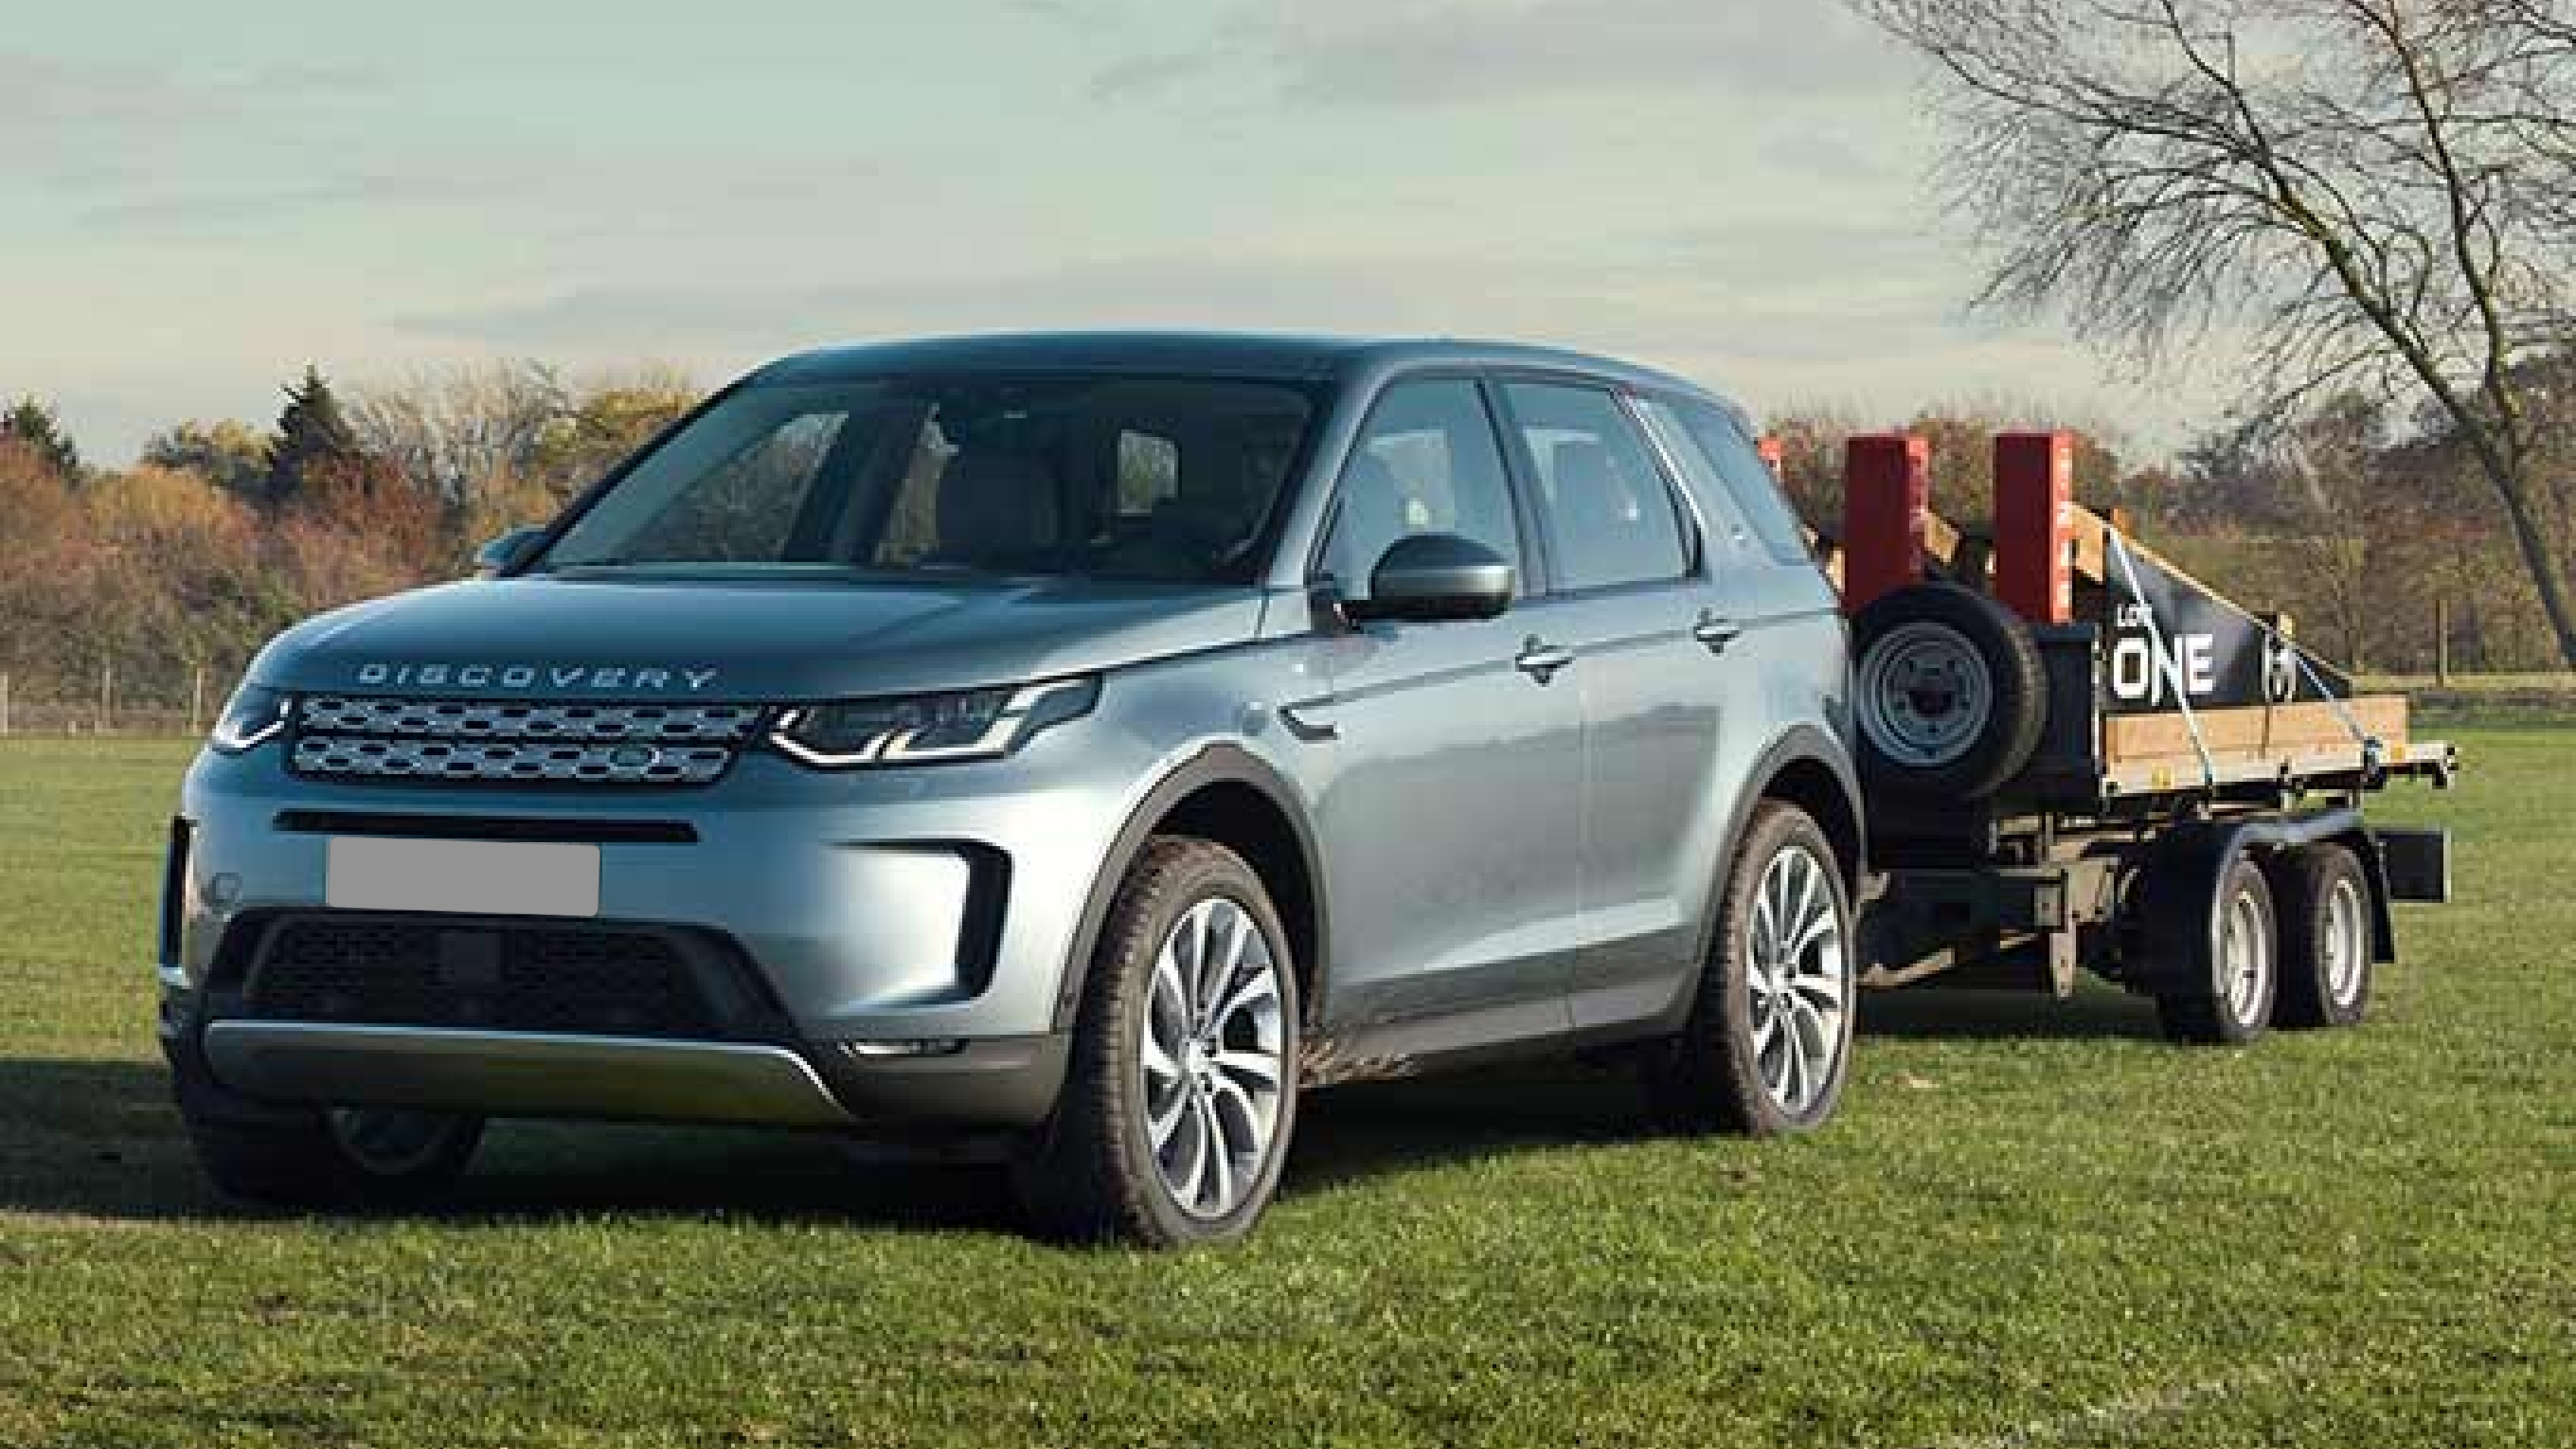 Land Rover dealership near me in Orlando, Visit Land Rover South Orlando and check out our new and used inventory or schedule service online today. 